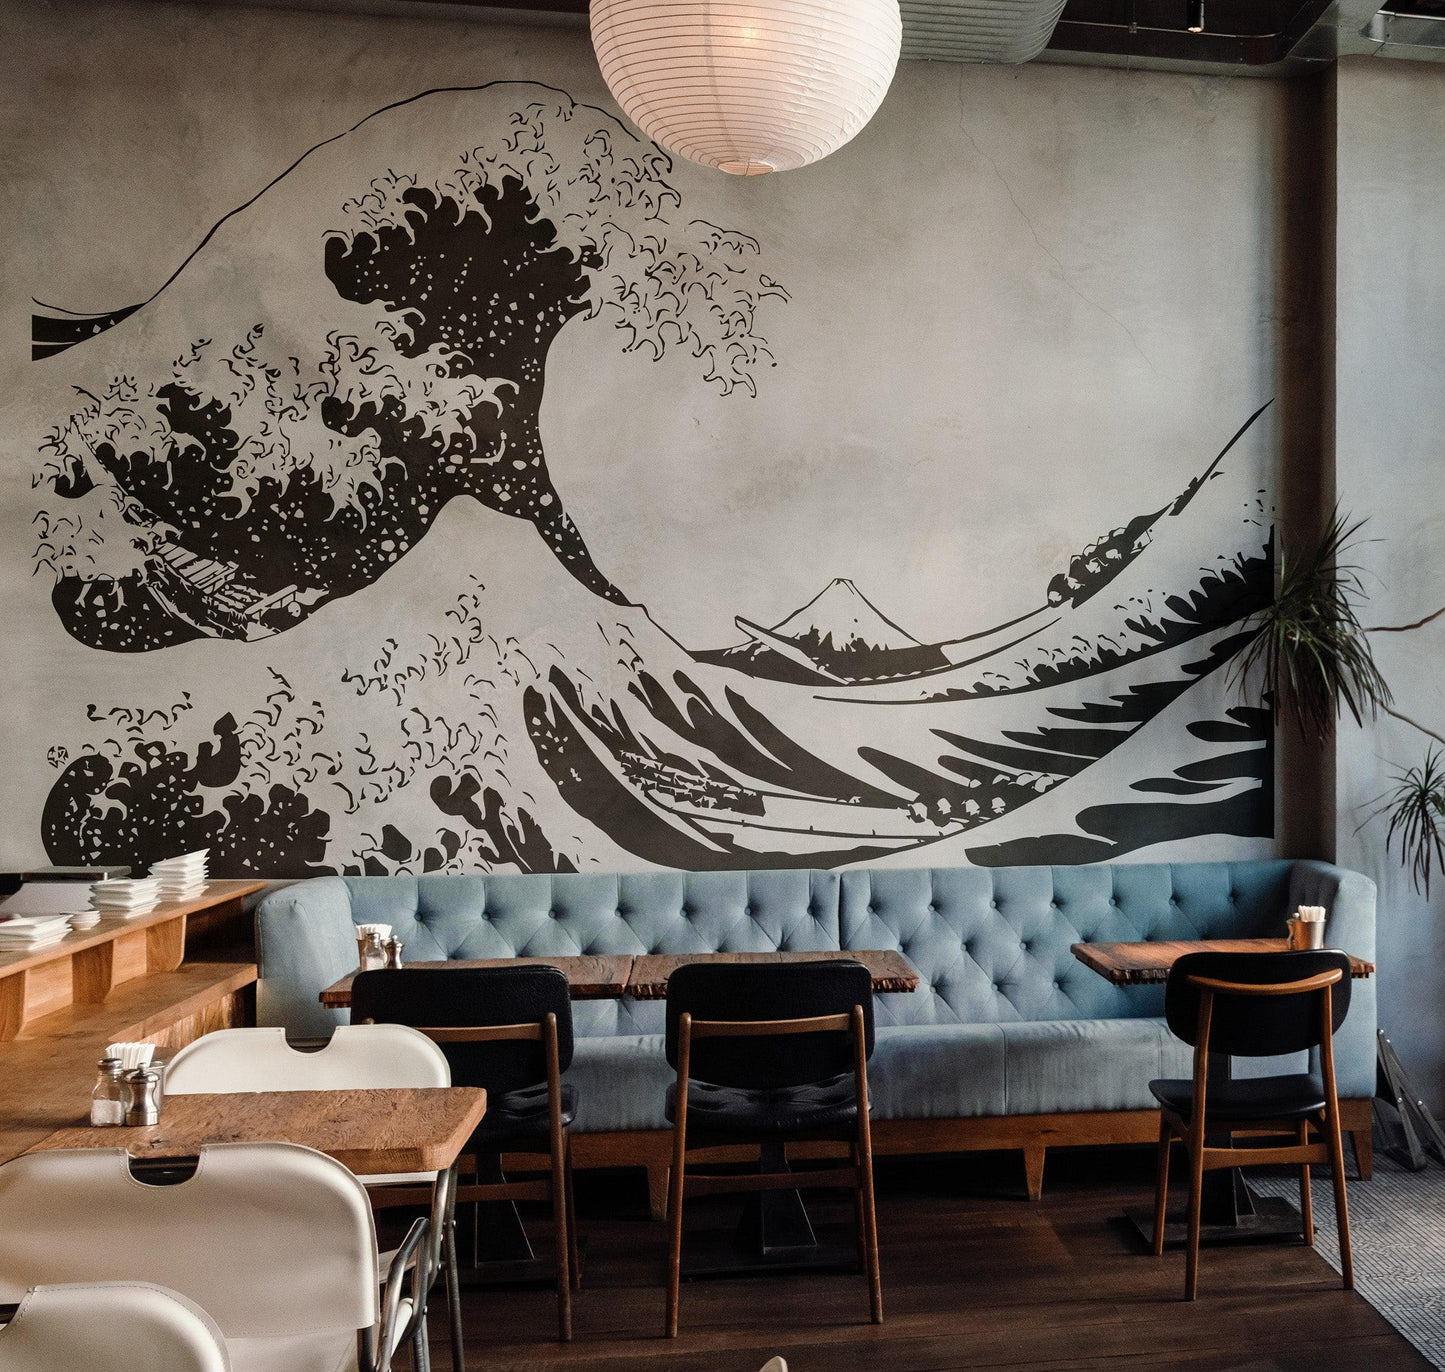 The Great Wave wall decal on a gray wall above a blue couch in a cafe